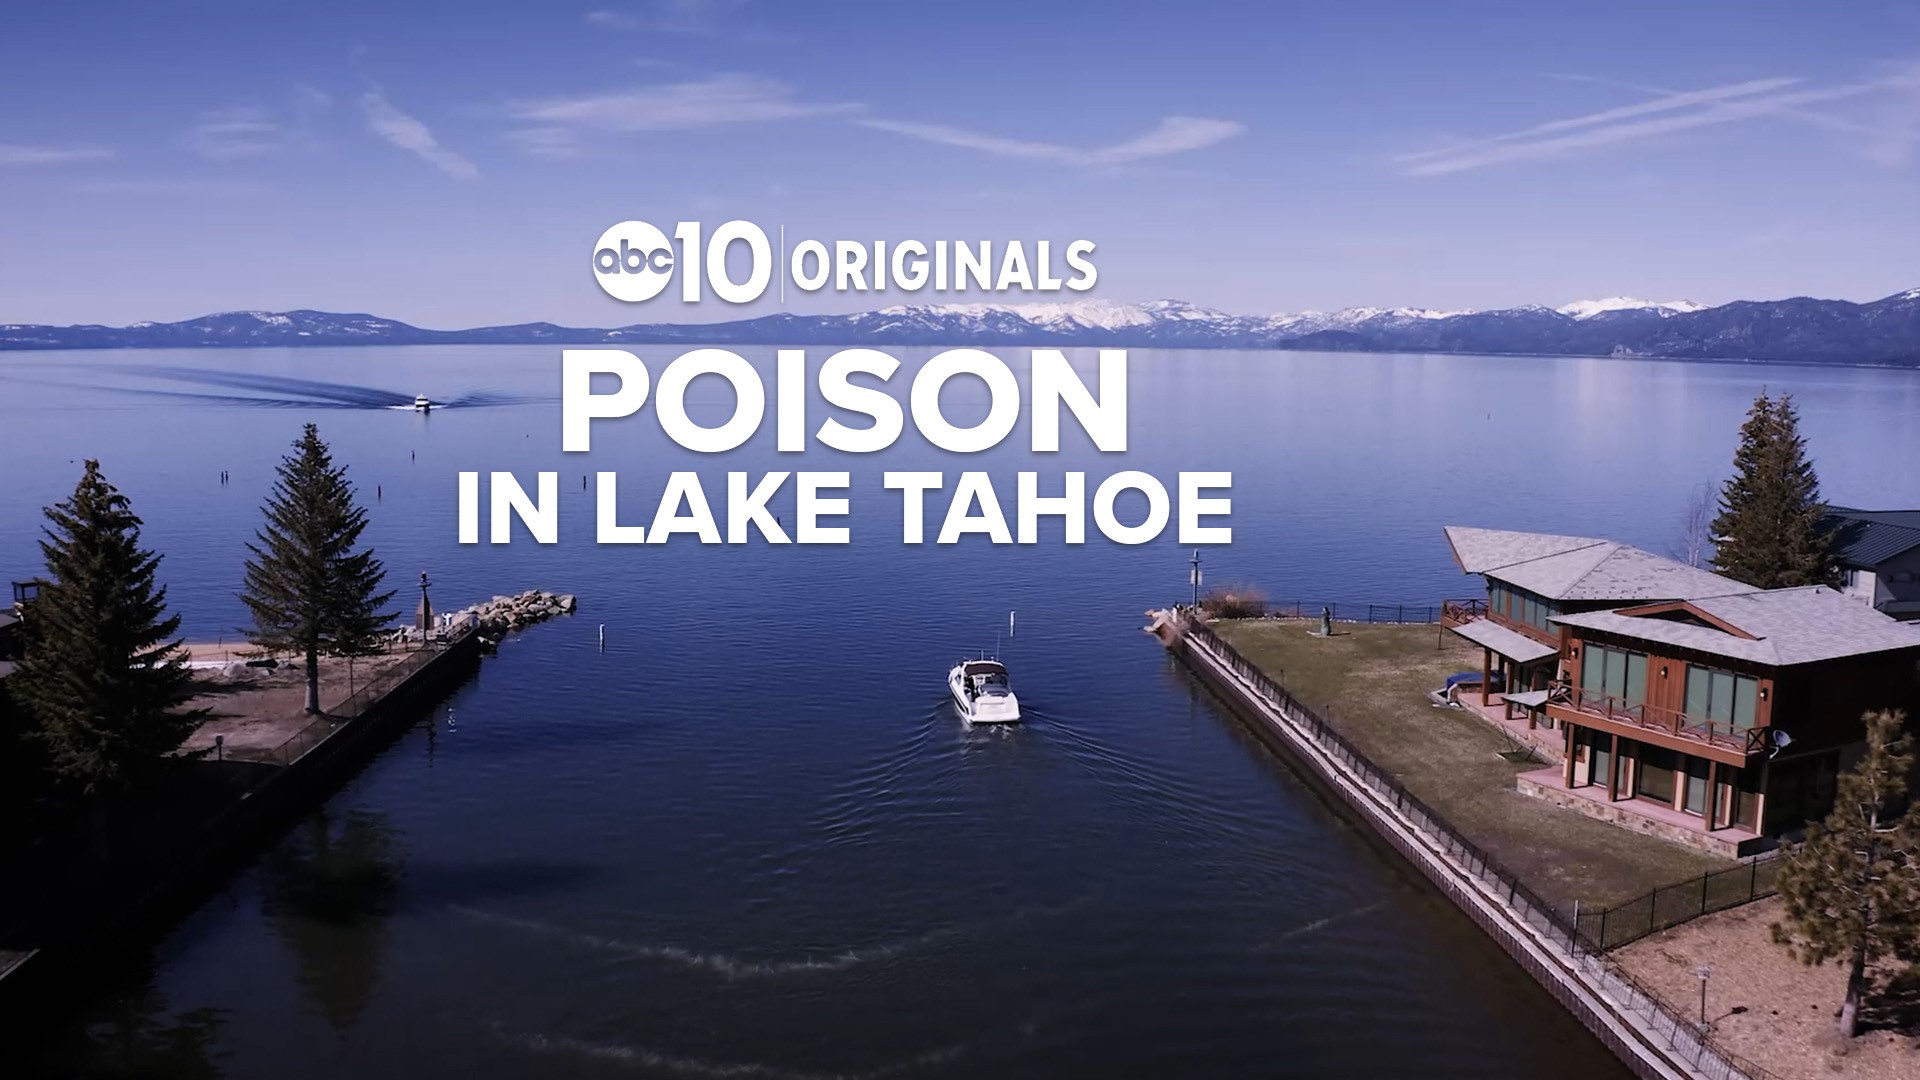 A controversial test to poison invasive underwater weeds is dividing people and environmental groups in Lake Tahoe.